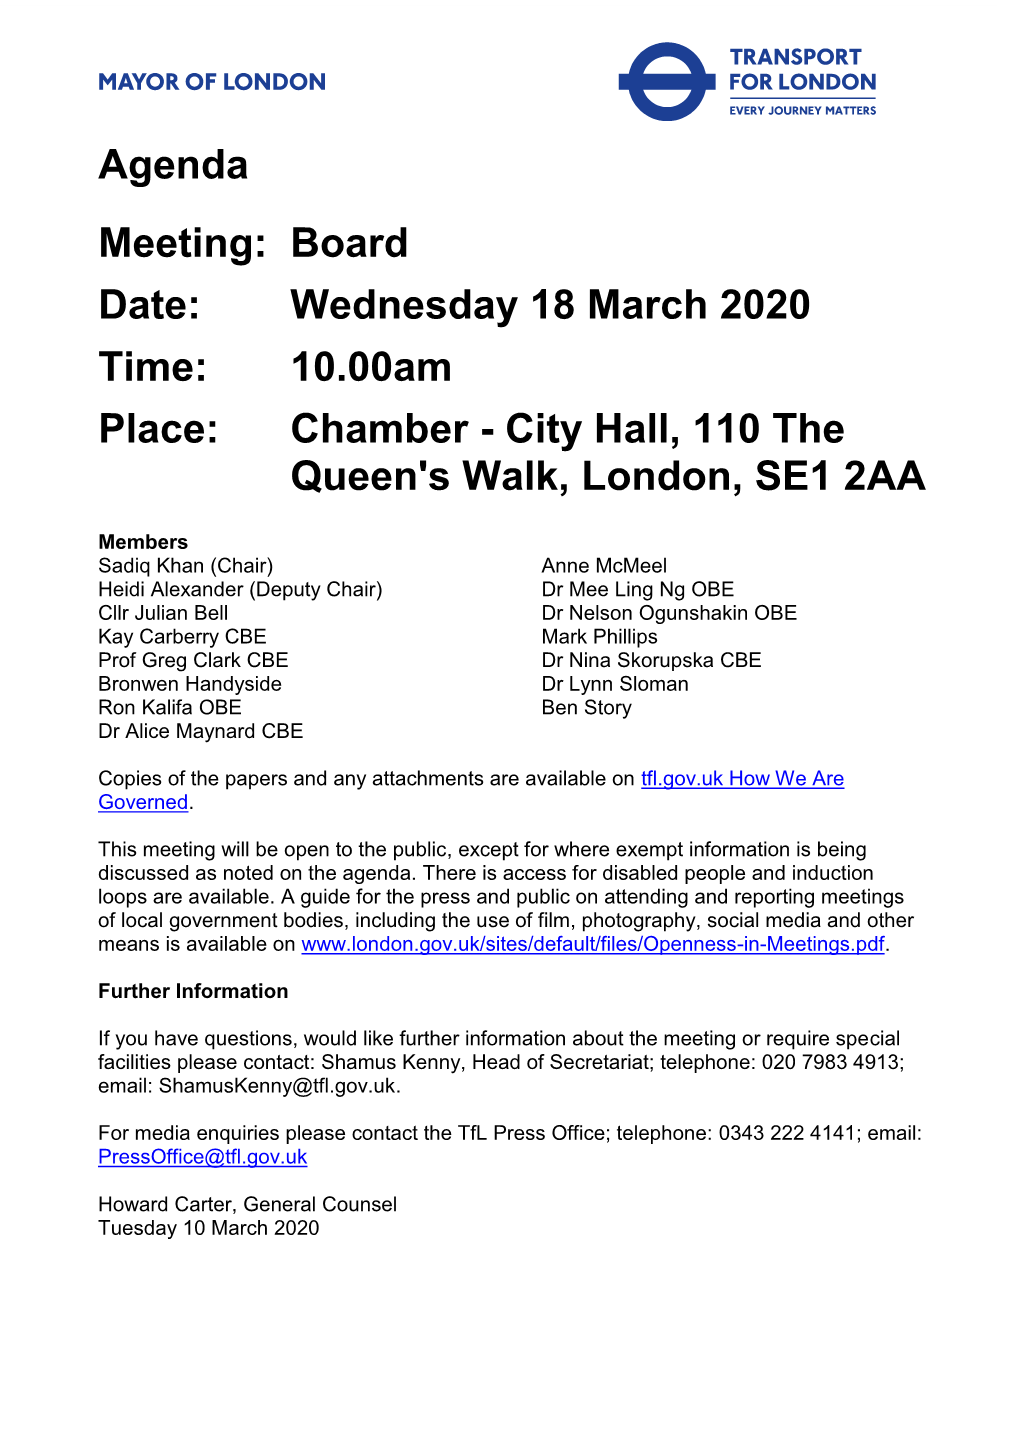 Agenda and Papers for Board, 18/03/2020 10:00